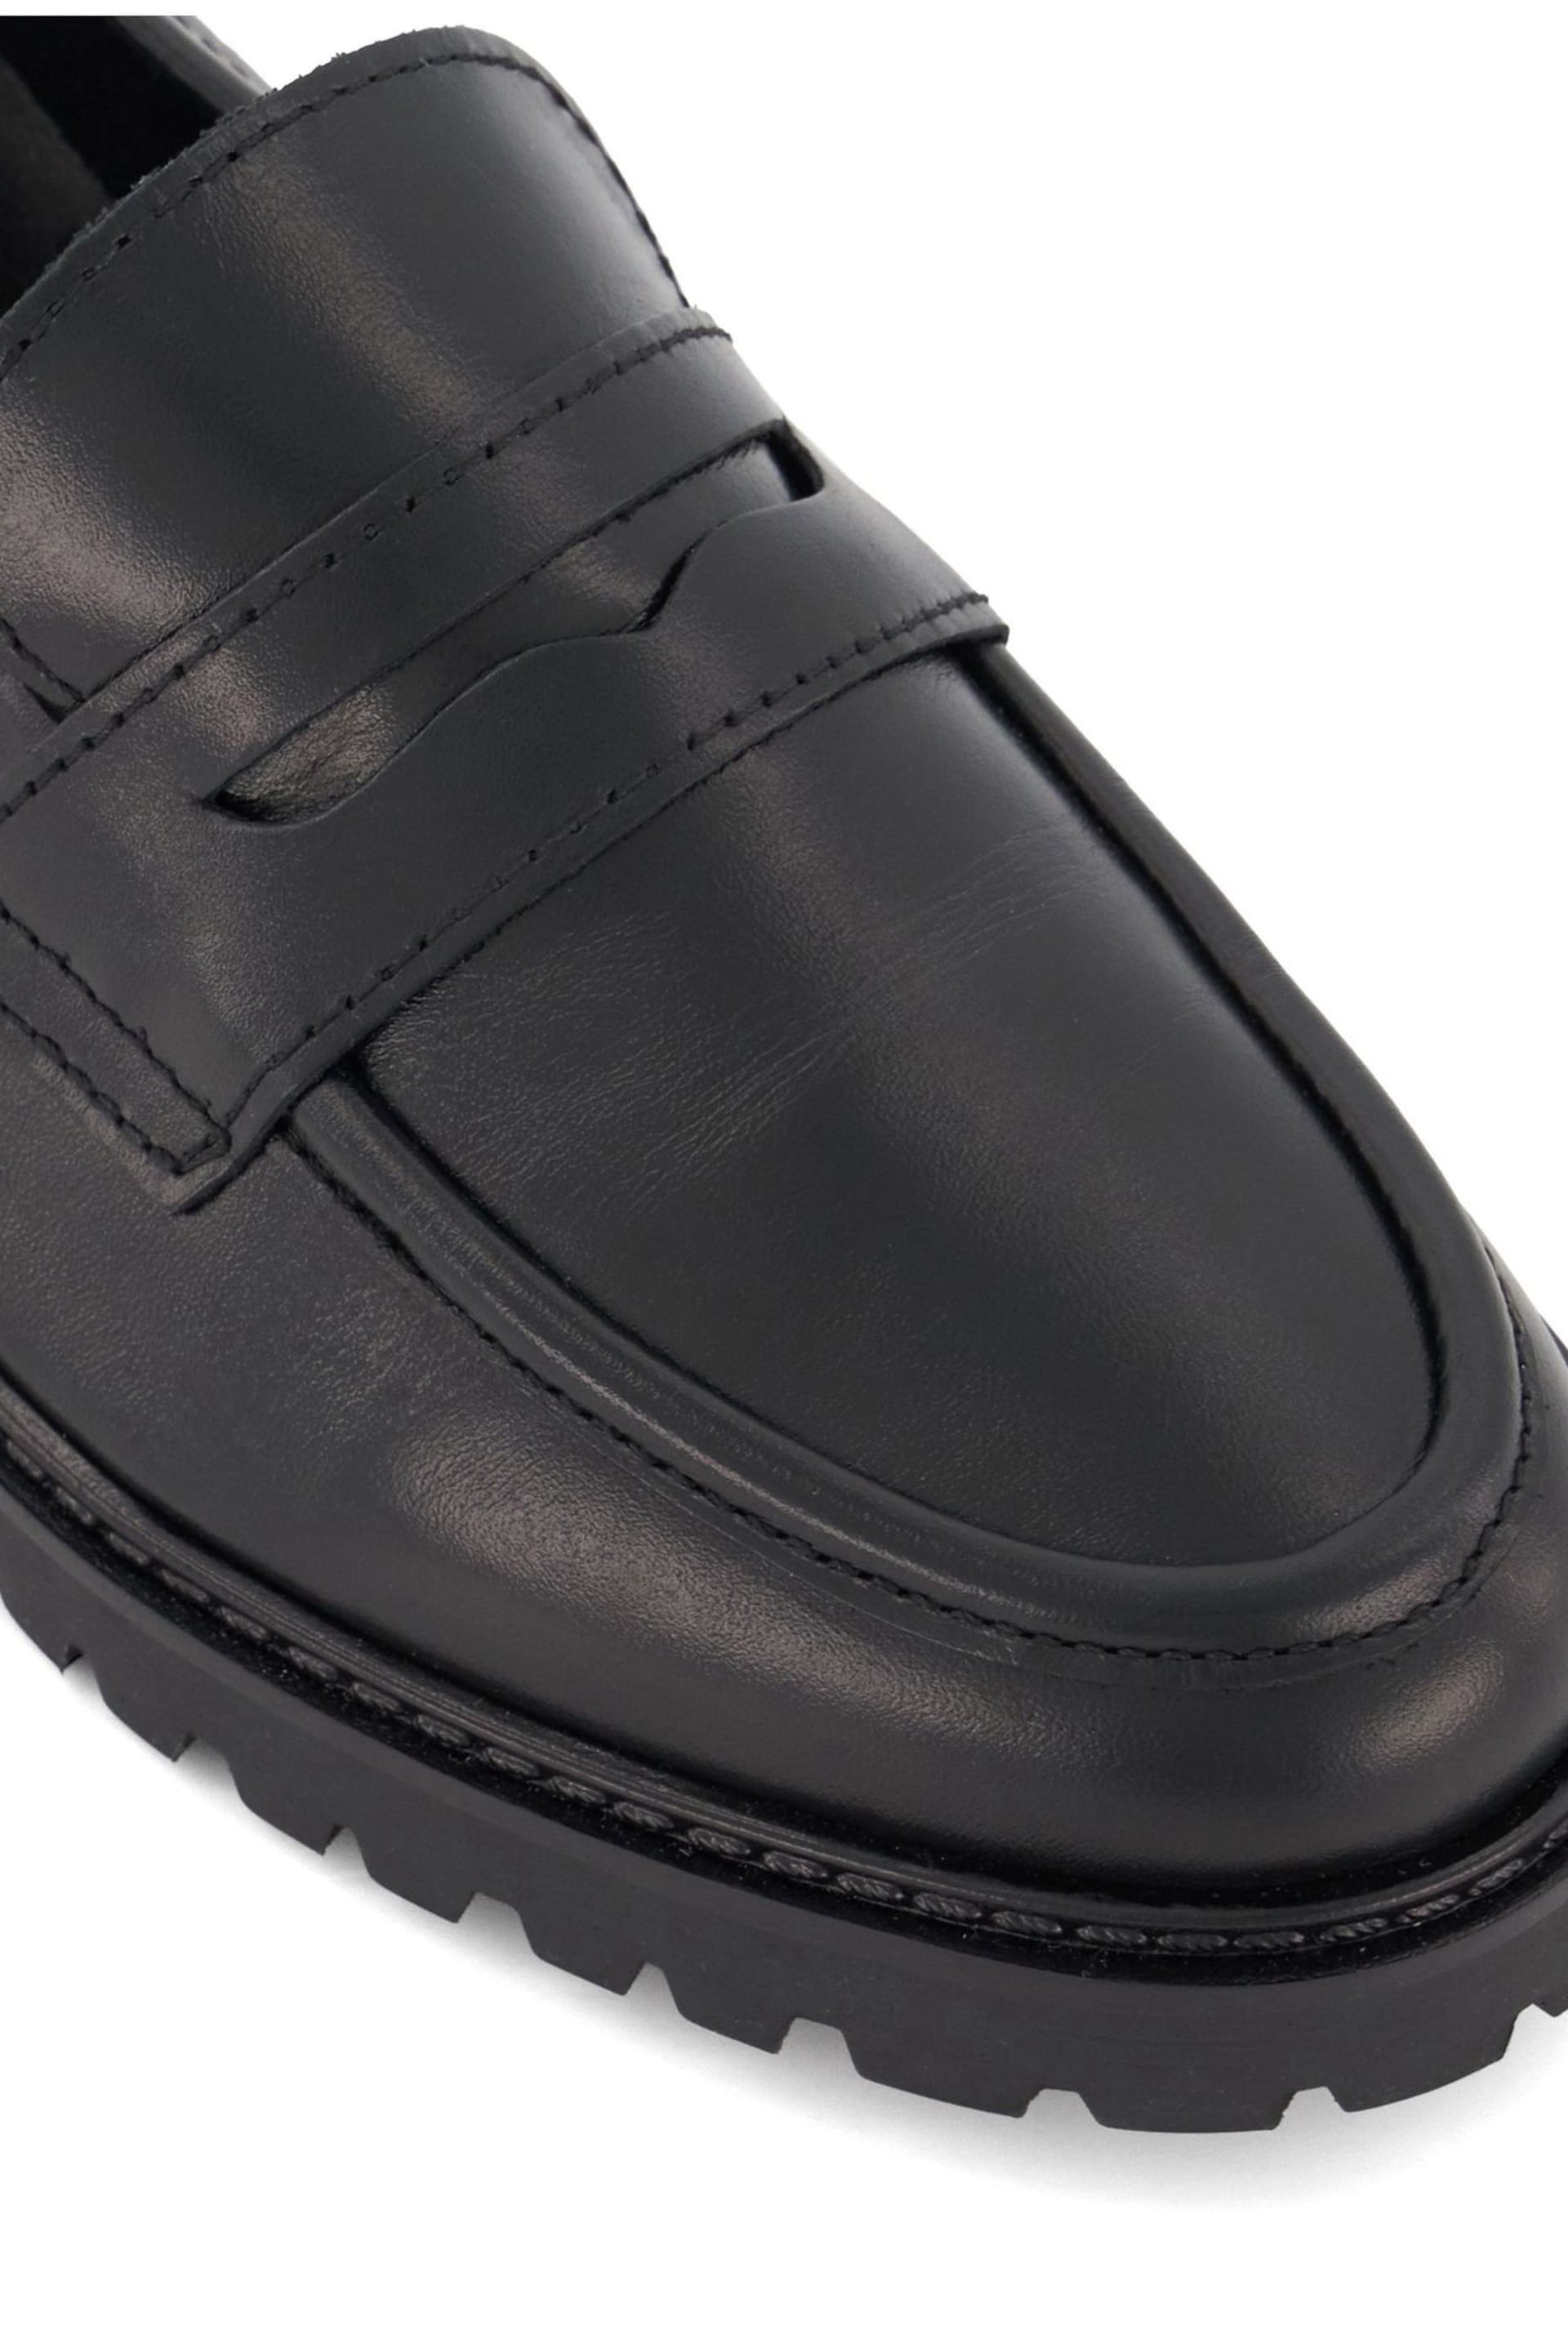 Dune London Black Gild Cleated Penny Loafers - Image 5 of 6